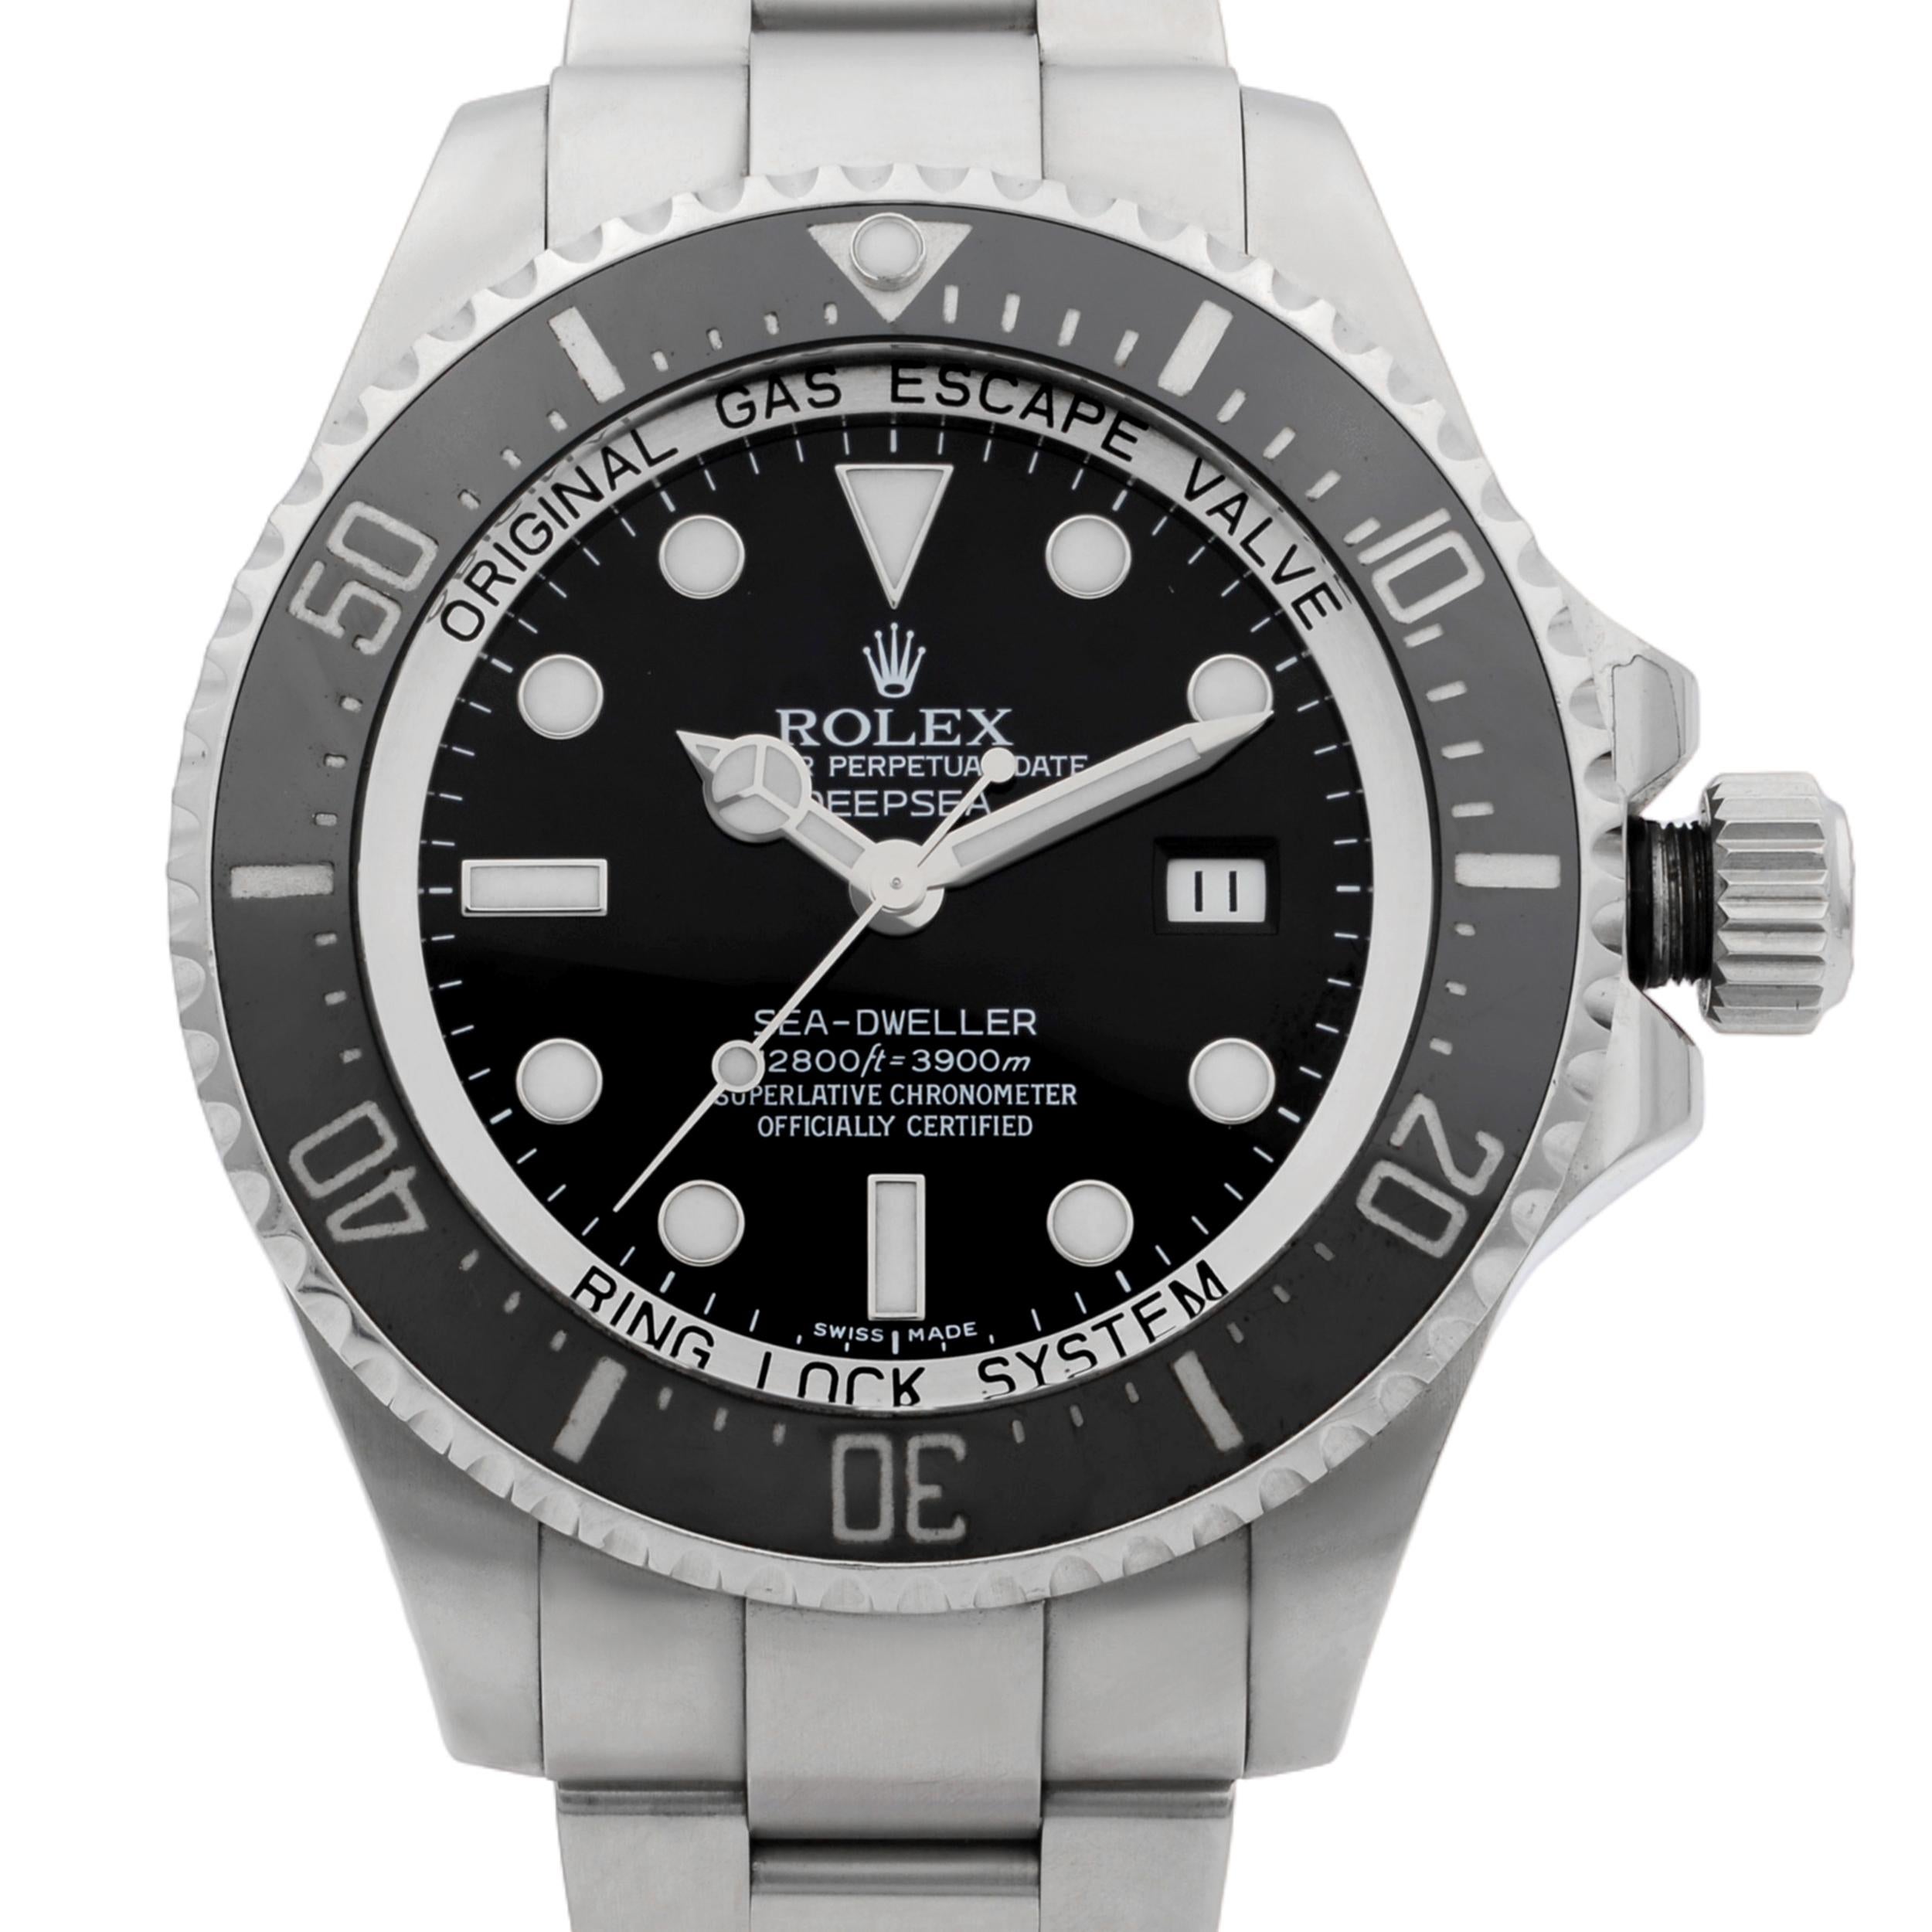 2016 card. This pre-owned Rolex Deepsea  116660  is a beautiful men's timepiece that is powered by mechanical (automatic) movement which is cased in a stainless steel case. It has a round shape face, date indicator dial and has hand sticks & dots